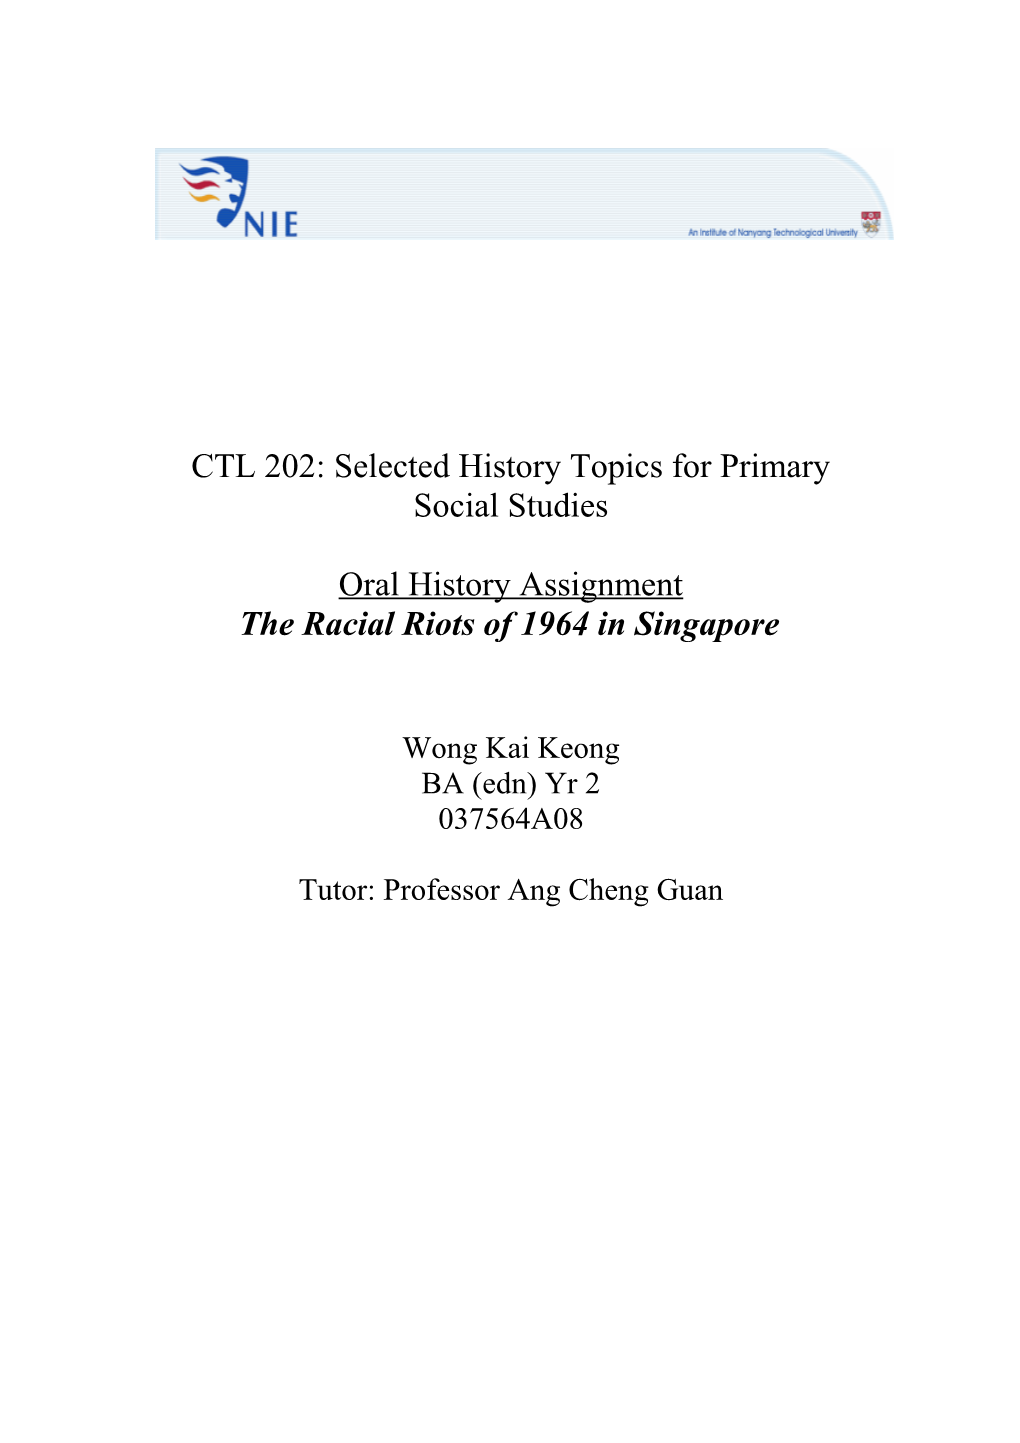 CTL 202: Selected History Topics for Primary Social Studies